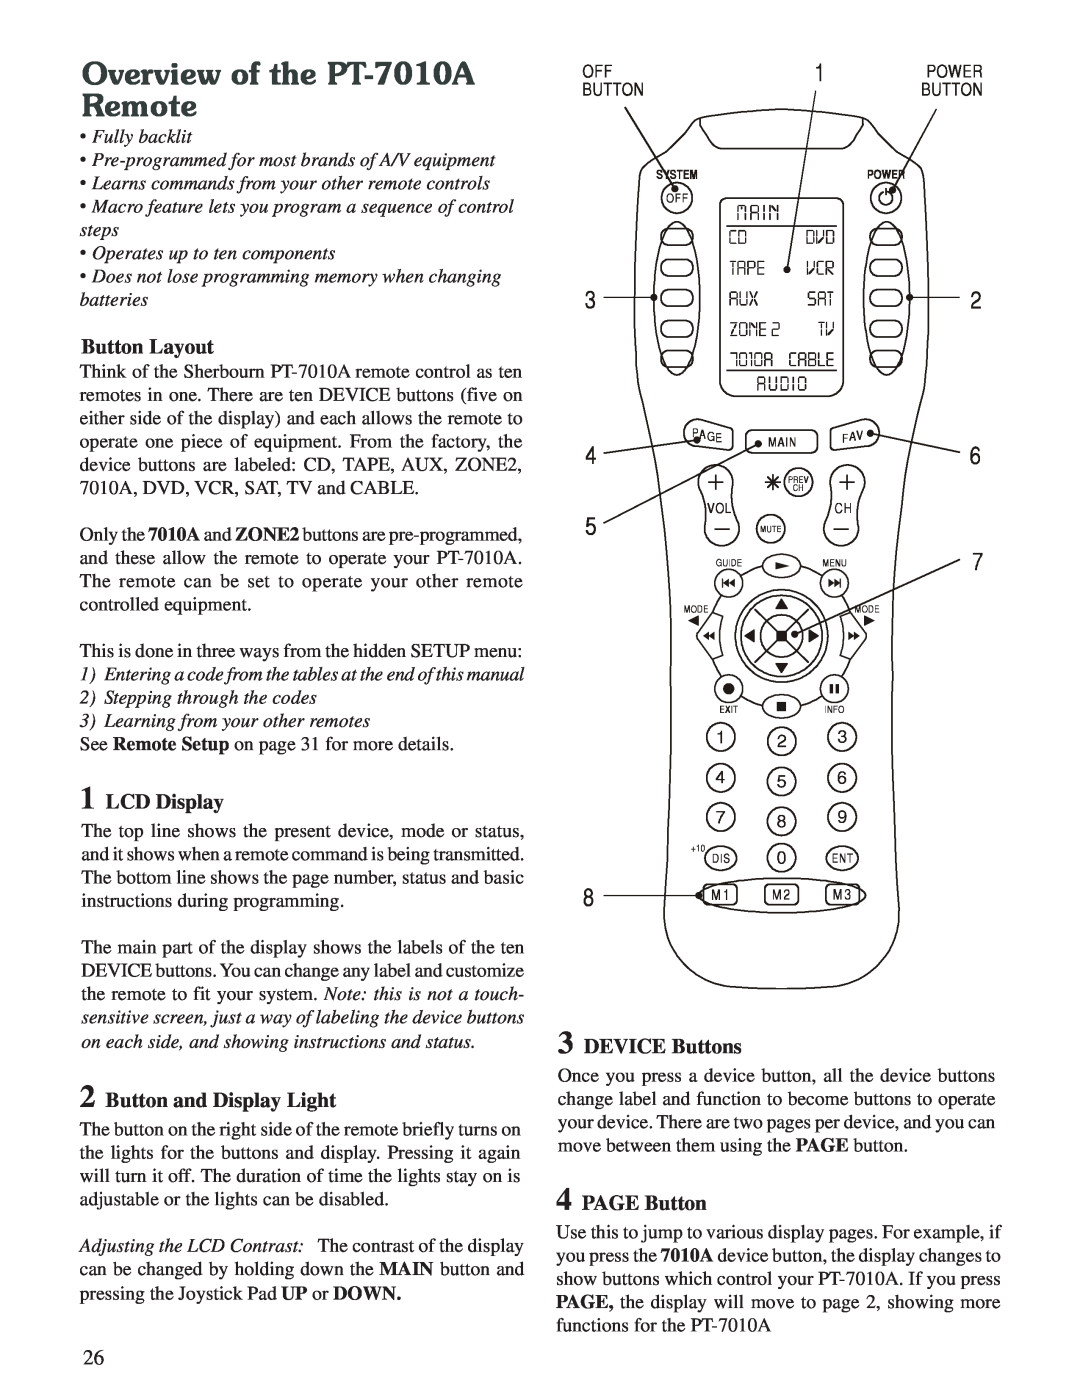 Sherbourn Technologies owner manual Overview of the PT-7010ARemote, Button Layout, LCD Display, Button and Display Light 